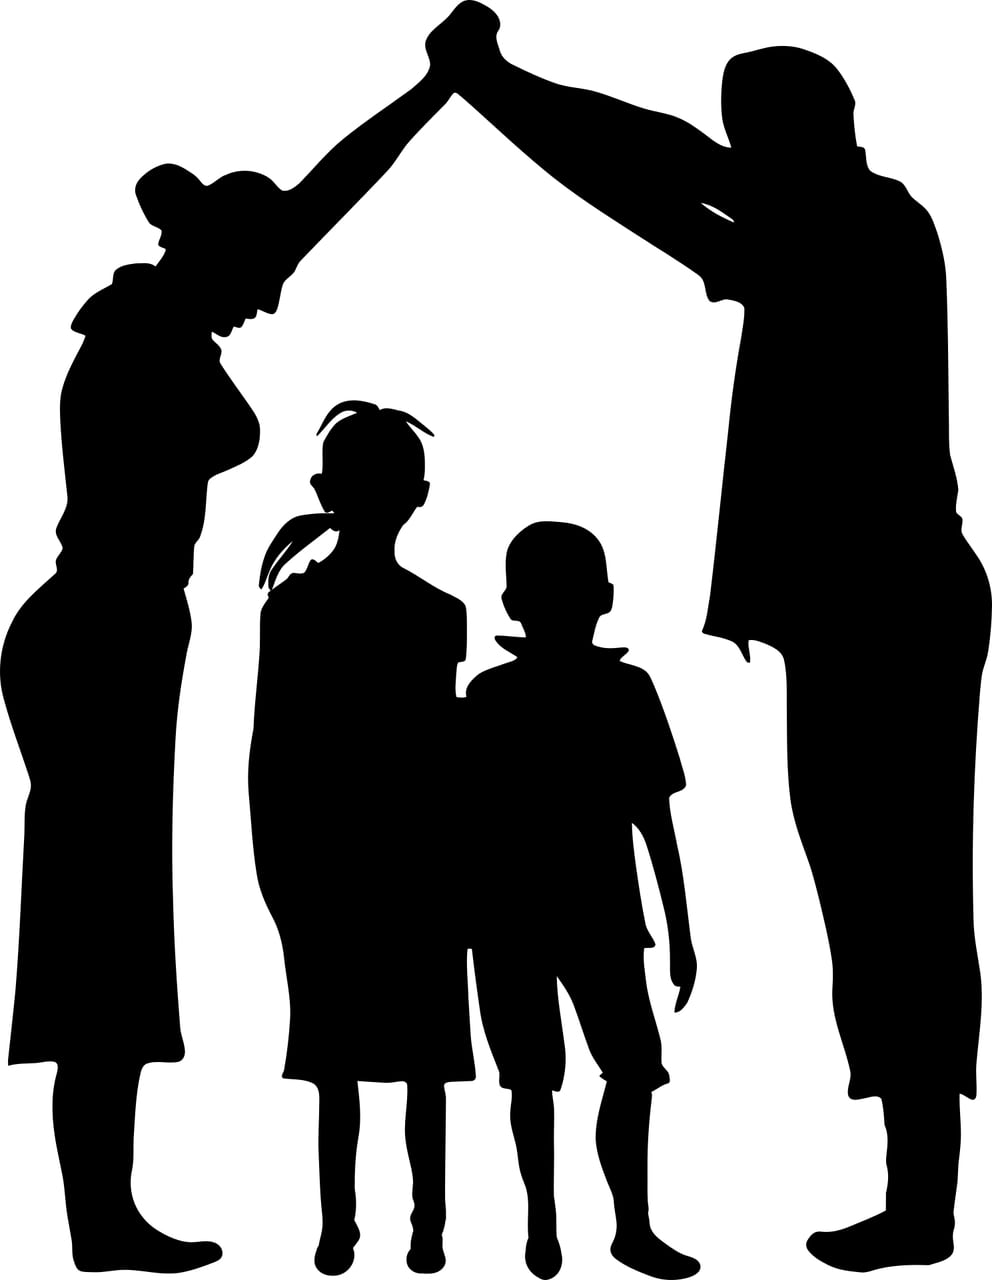 silhouette of a adults holding hands above the head of two children